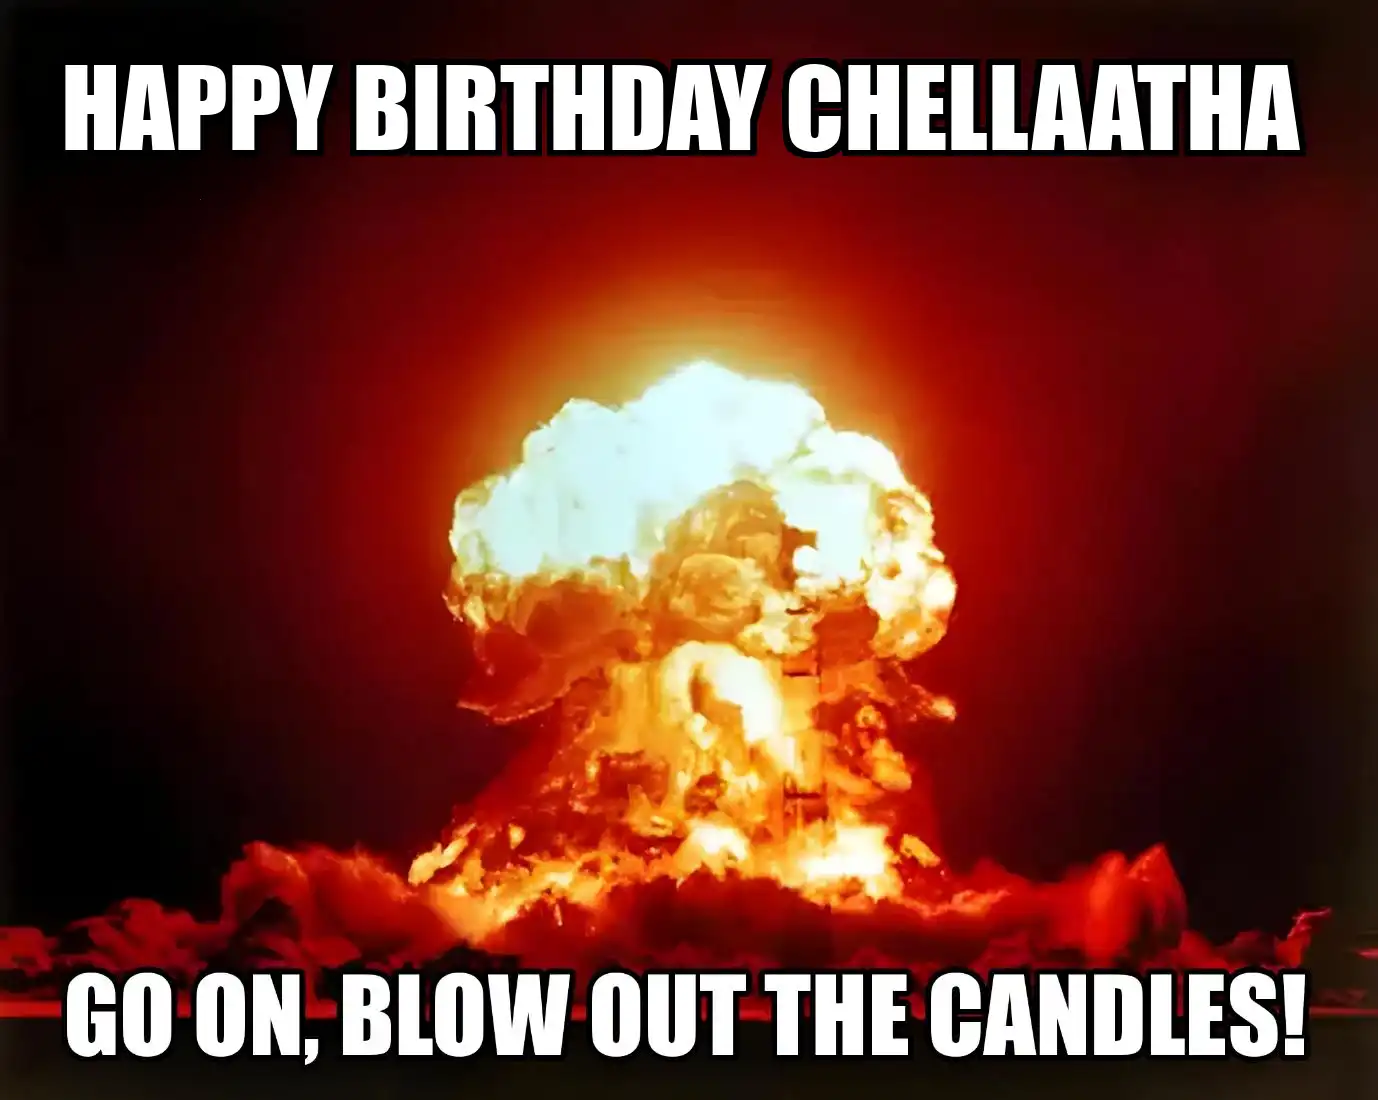 Happy Birthday Chellaatha Go On Blow Out The Candles Meme